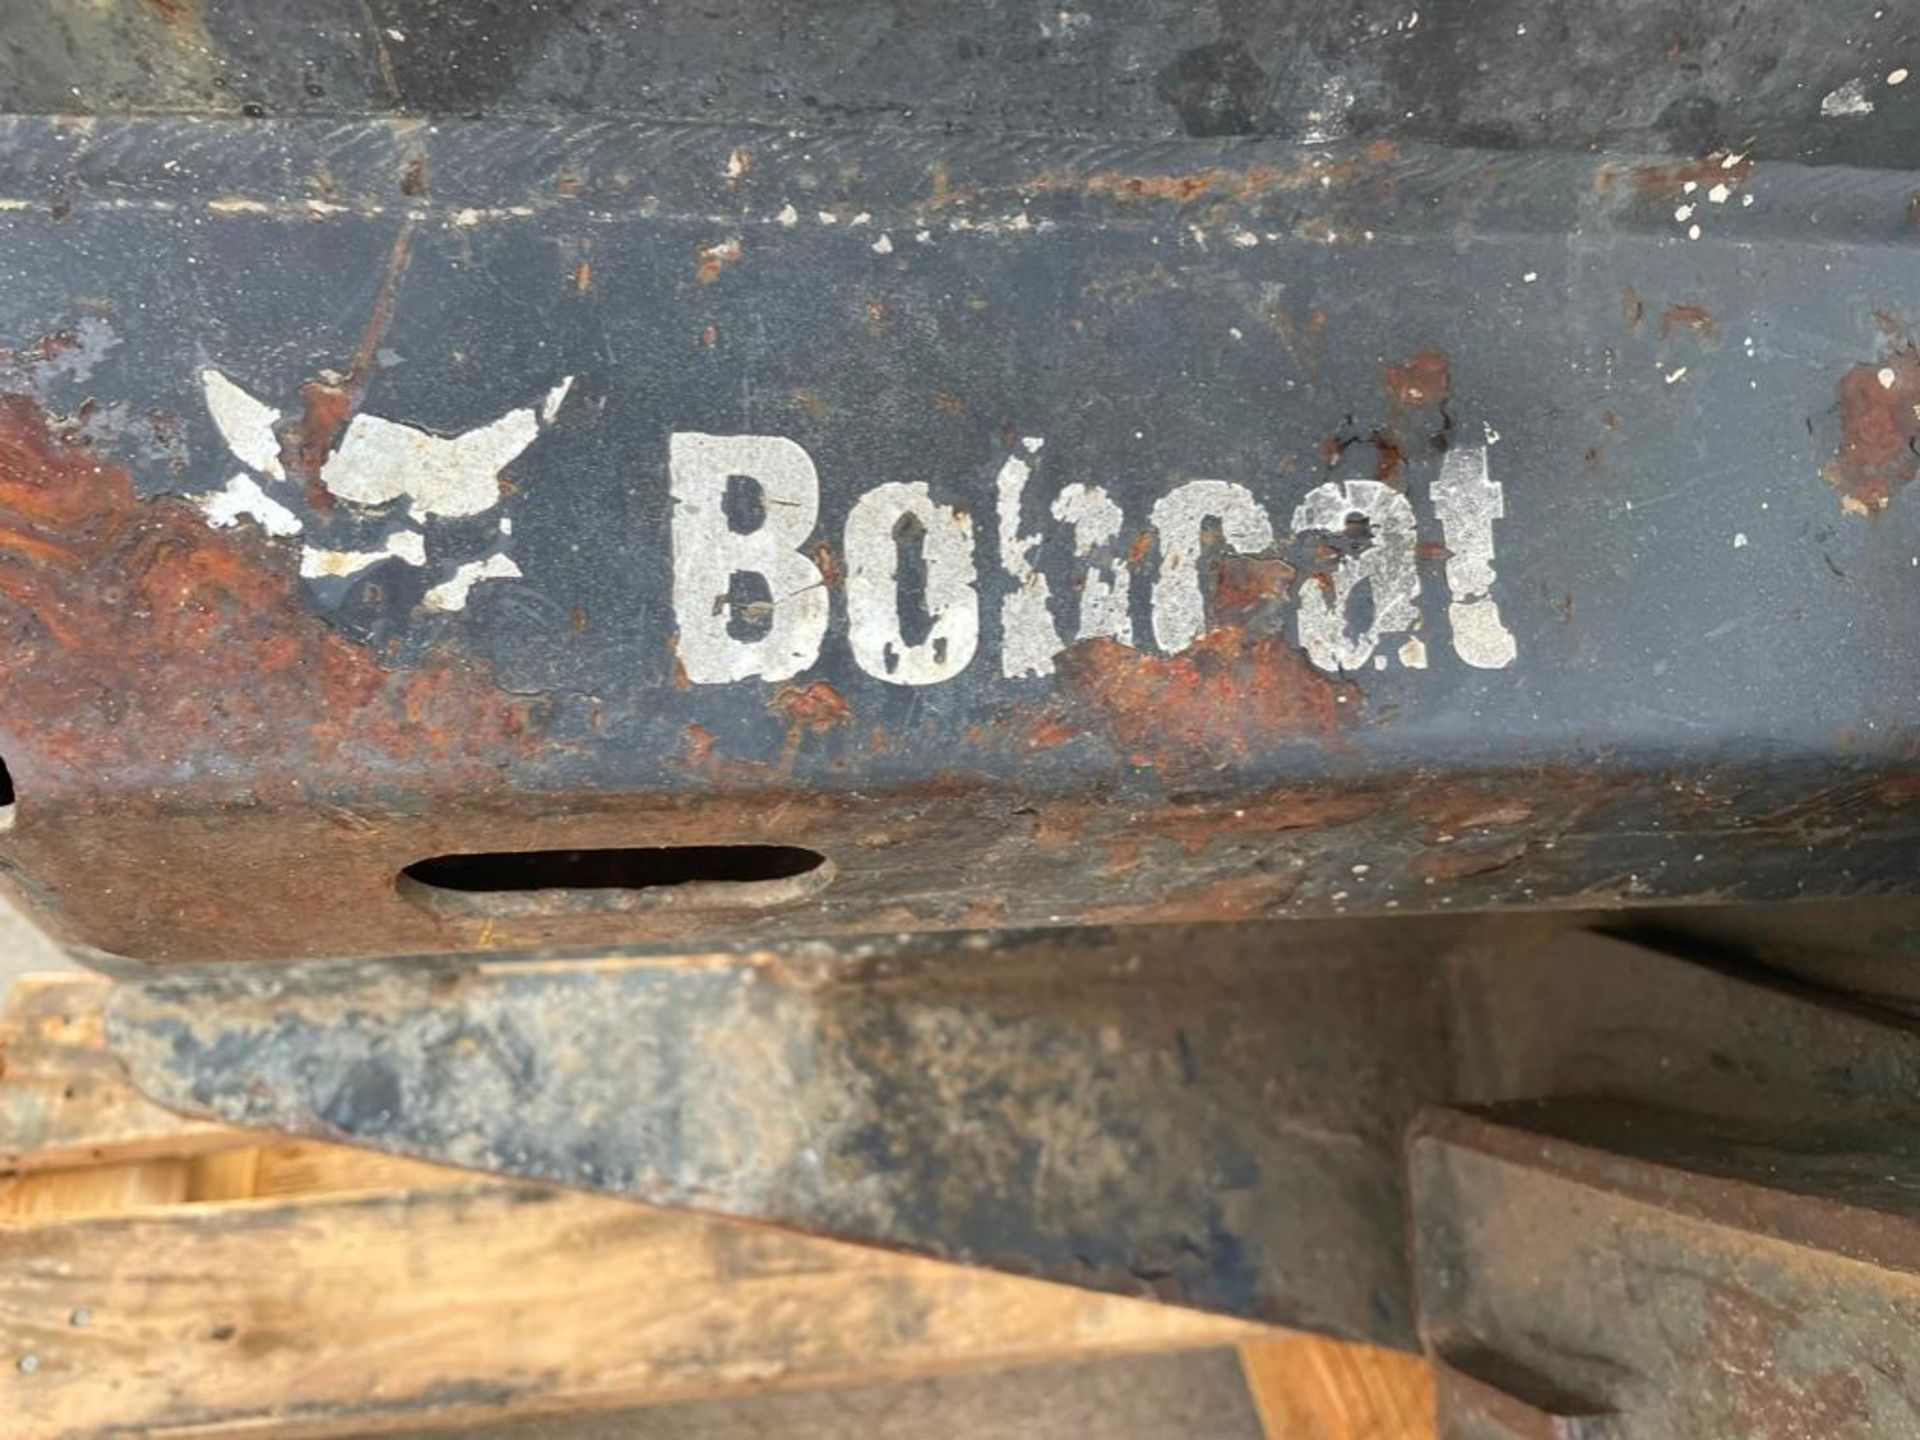 Bobcat Skid Steer Hammer Breaker Attachment. Located in Hazelwood, MO - Image 3 of 4